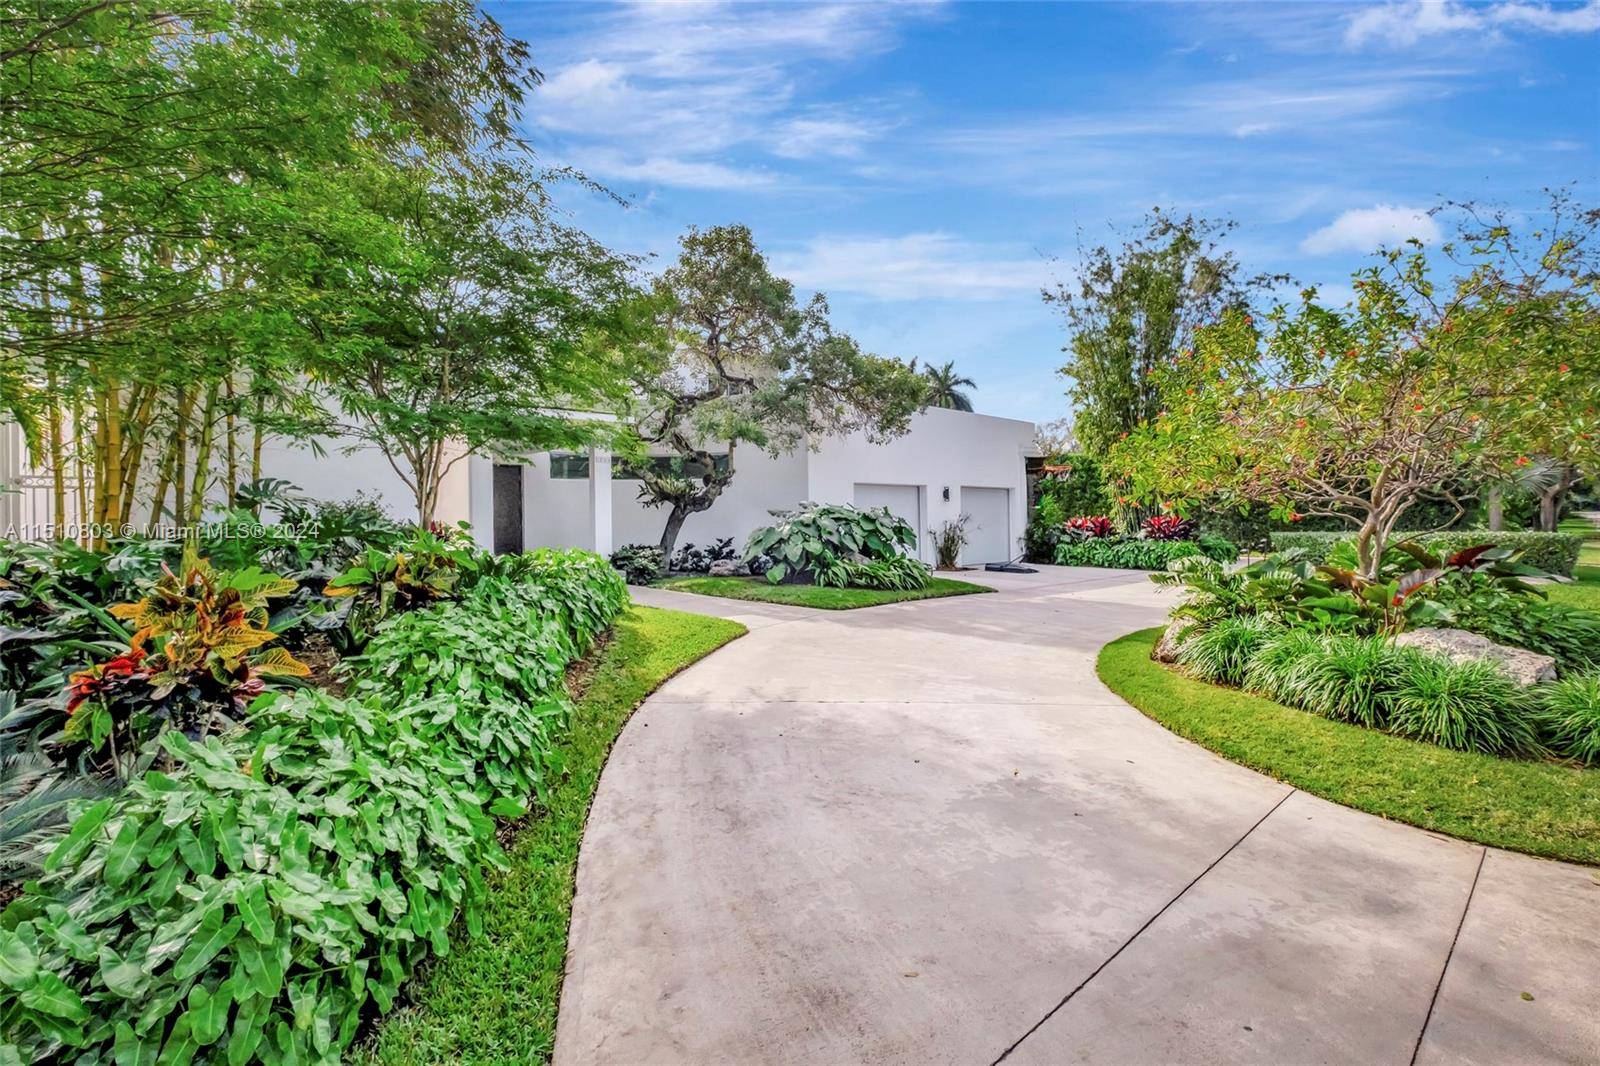 Welcome to this exquisitely designed home, located in coveted Miami Shores golf club community.